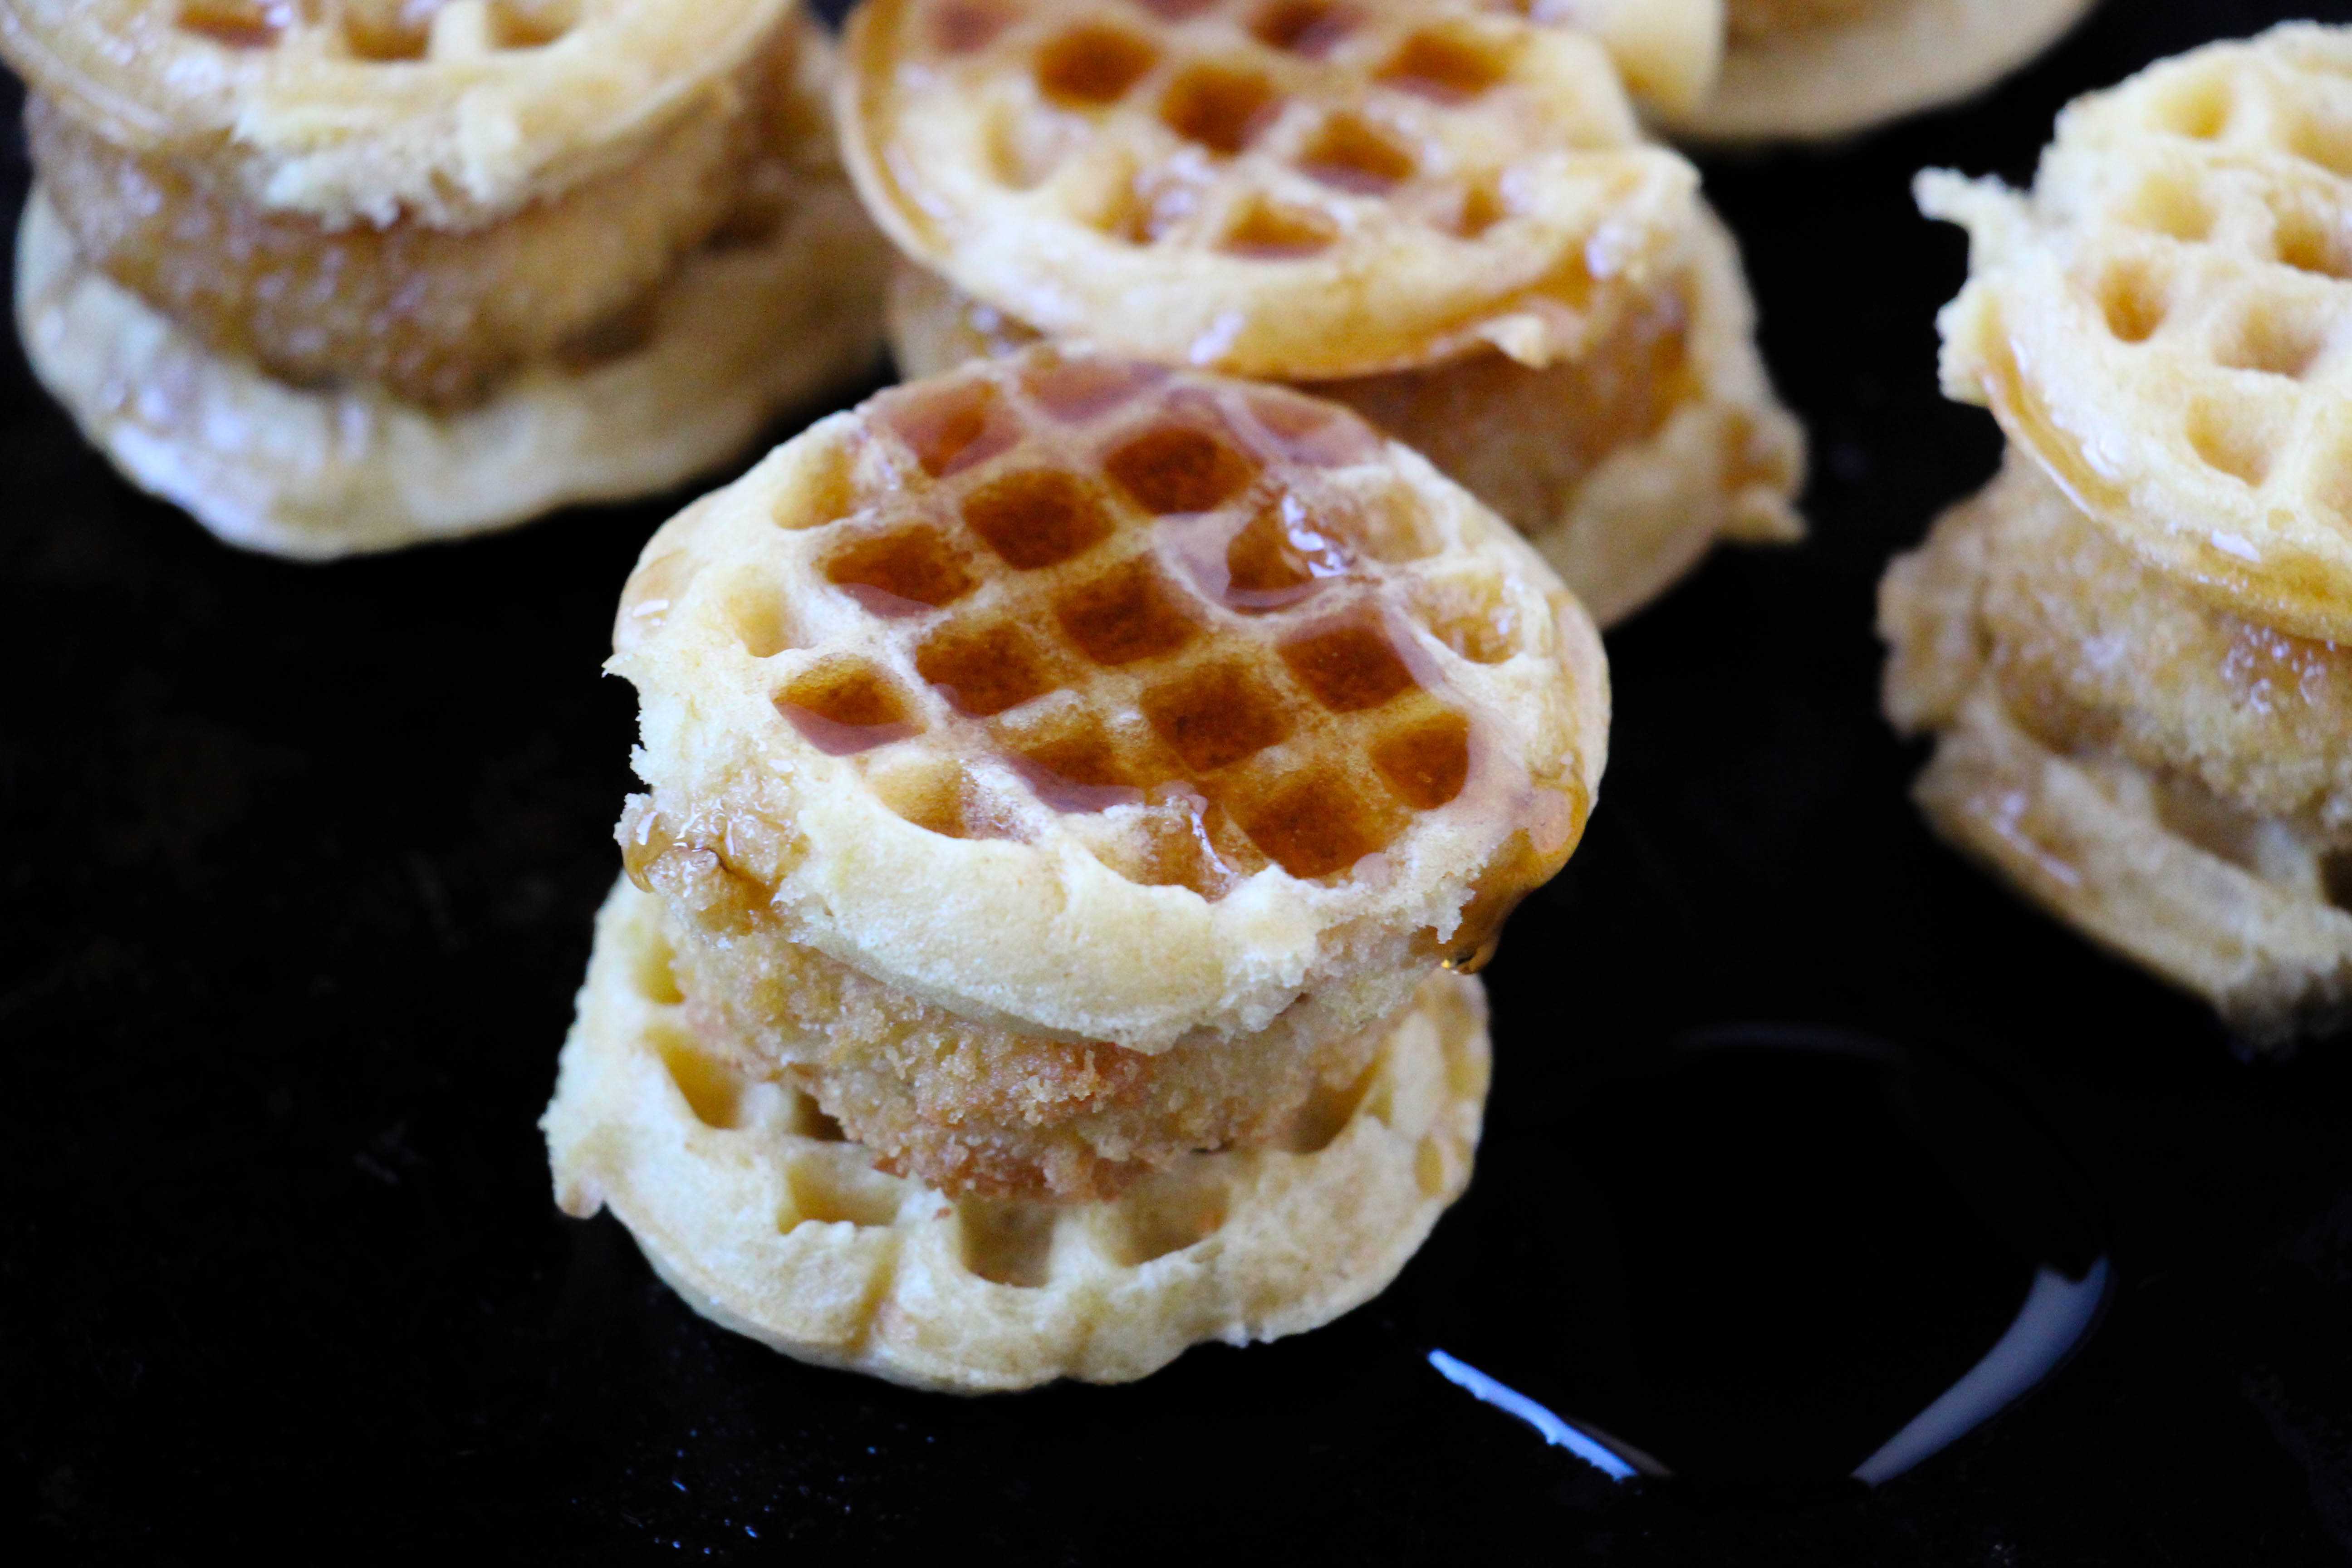 Want to know how to make Chicken and waffle slider at home? My chicken and waffle sliders are so good for game day snacks or as a fun dinner. No matter when you serve this chicken and waffles recipe, you can be sure everyone will love them.